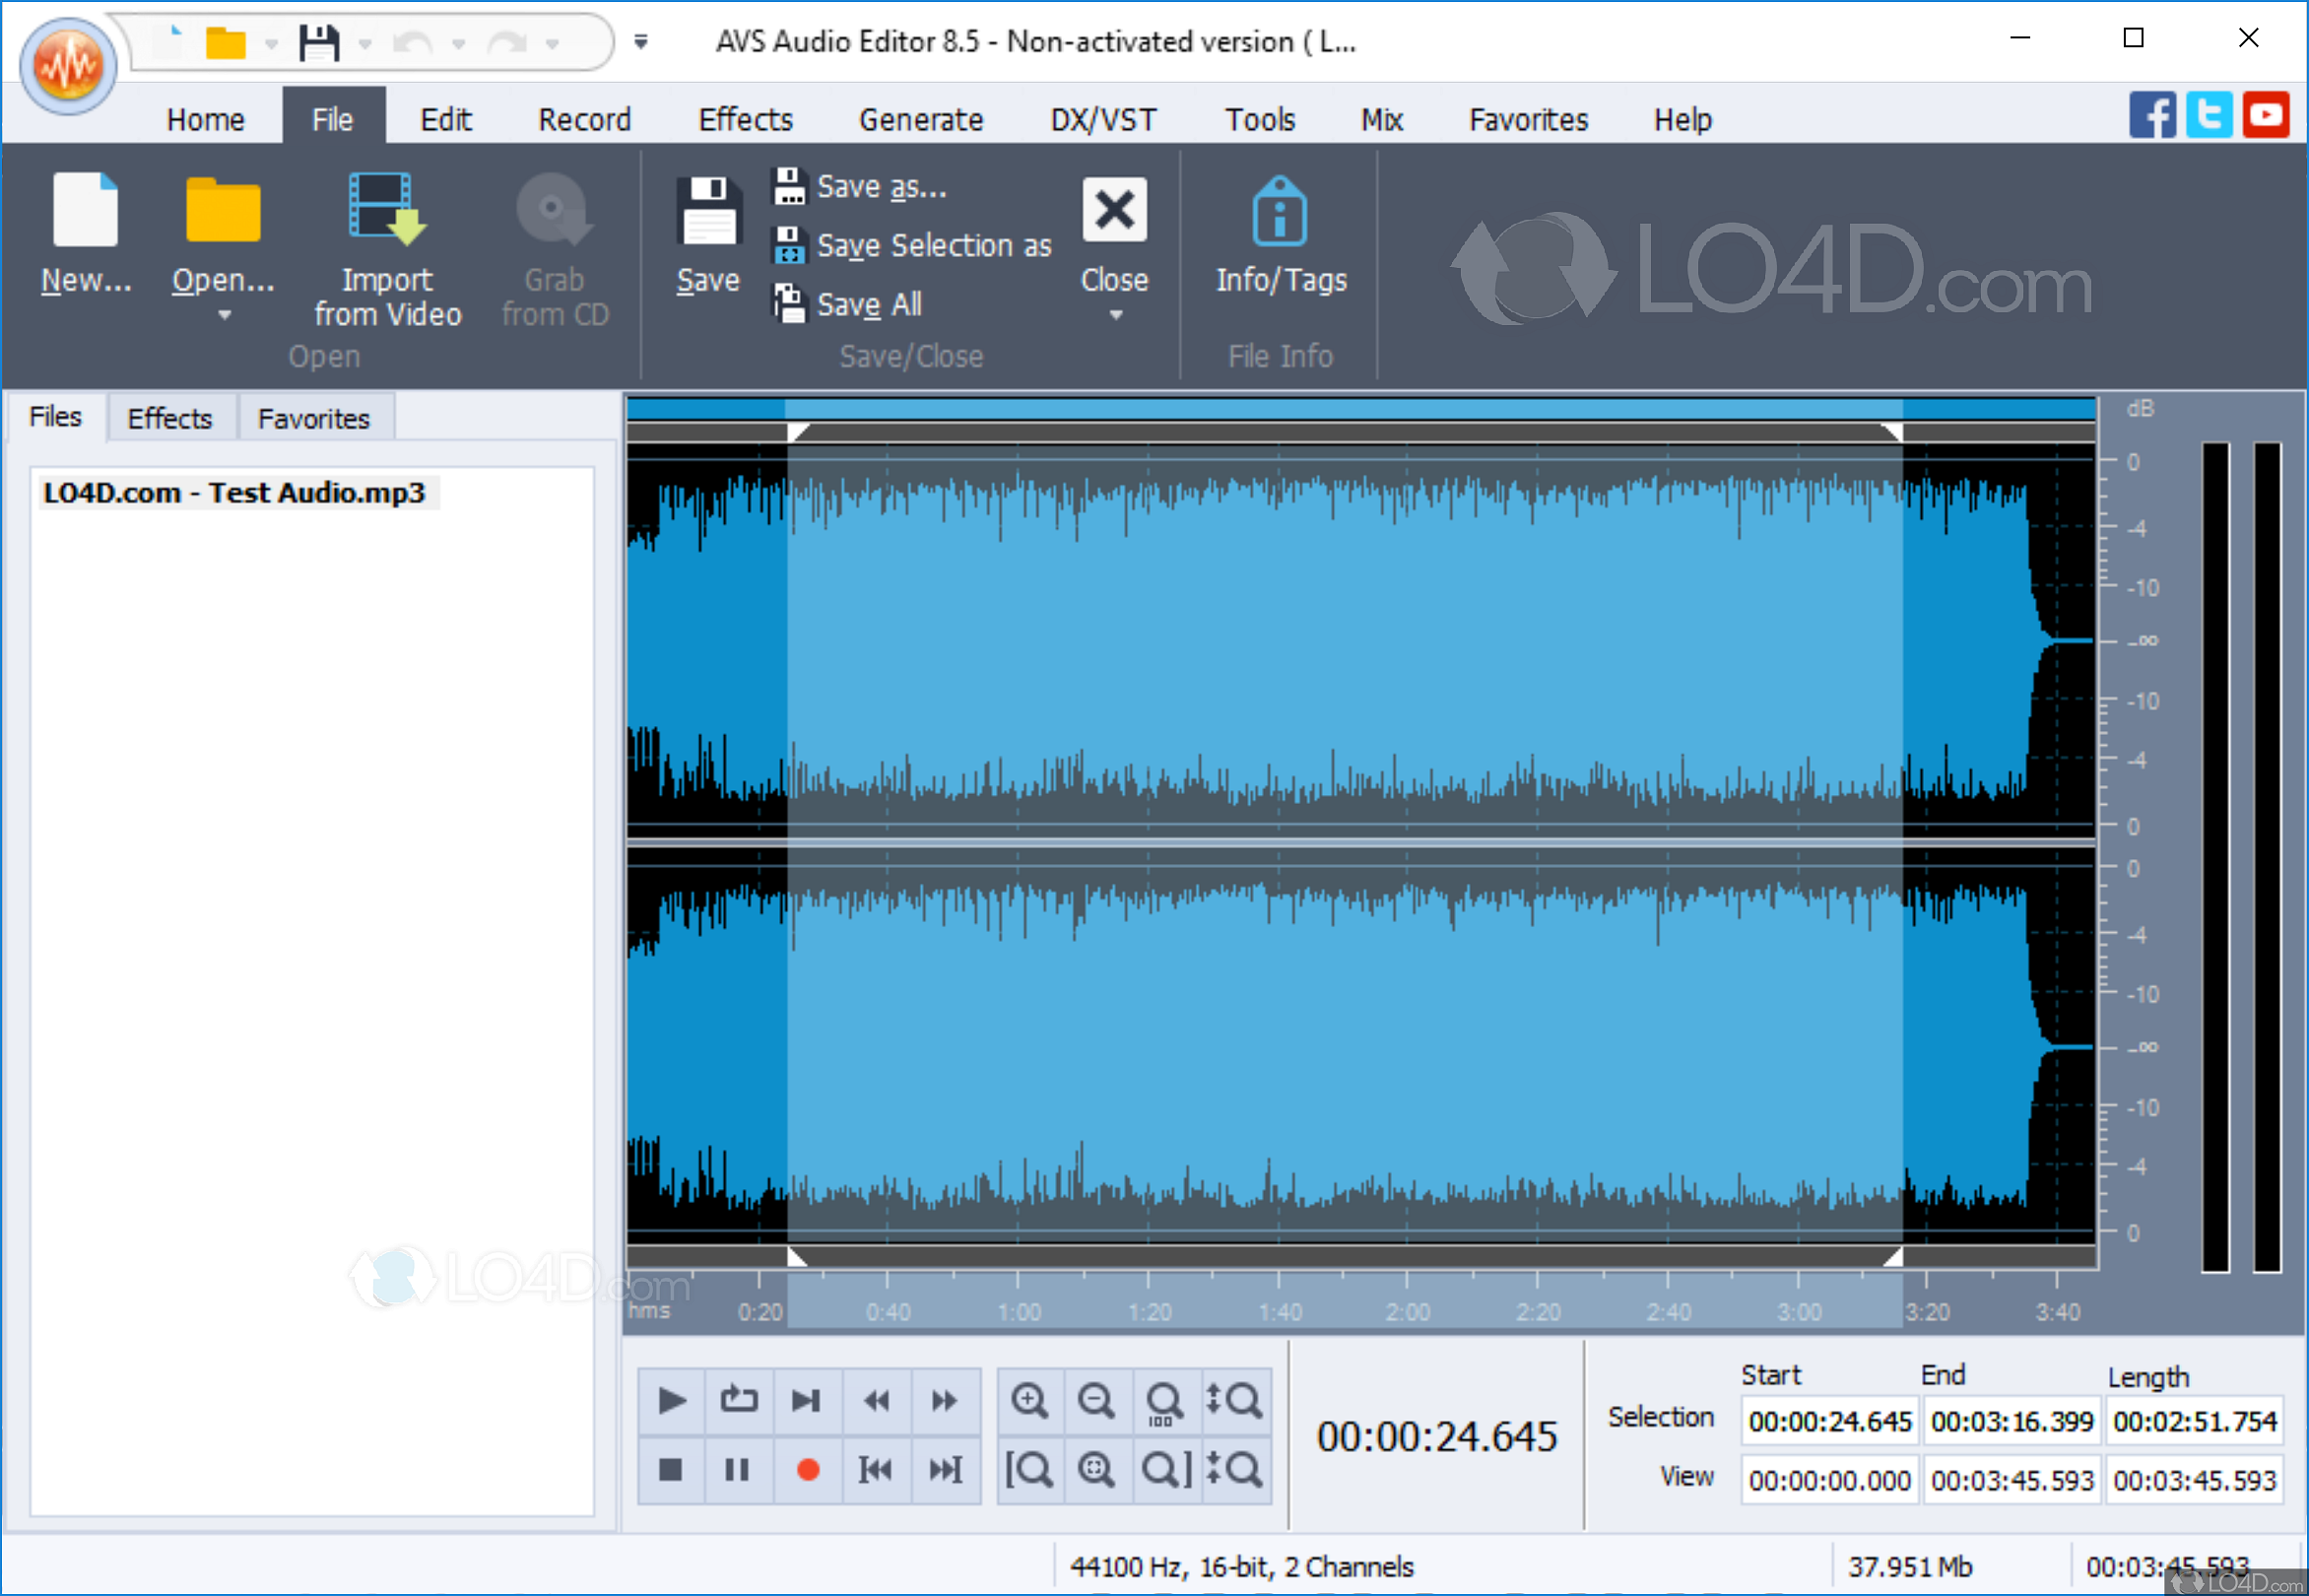 download the last version for android AVS Audio Editor 10.4.2.571